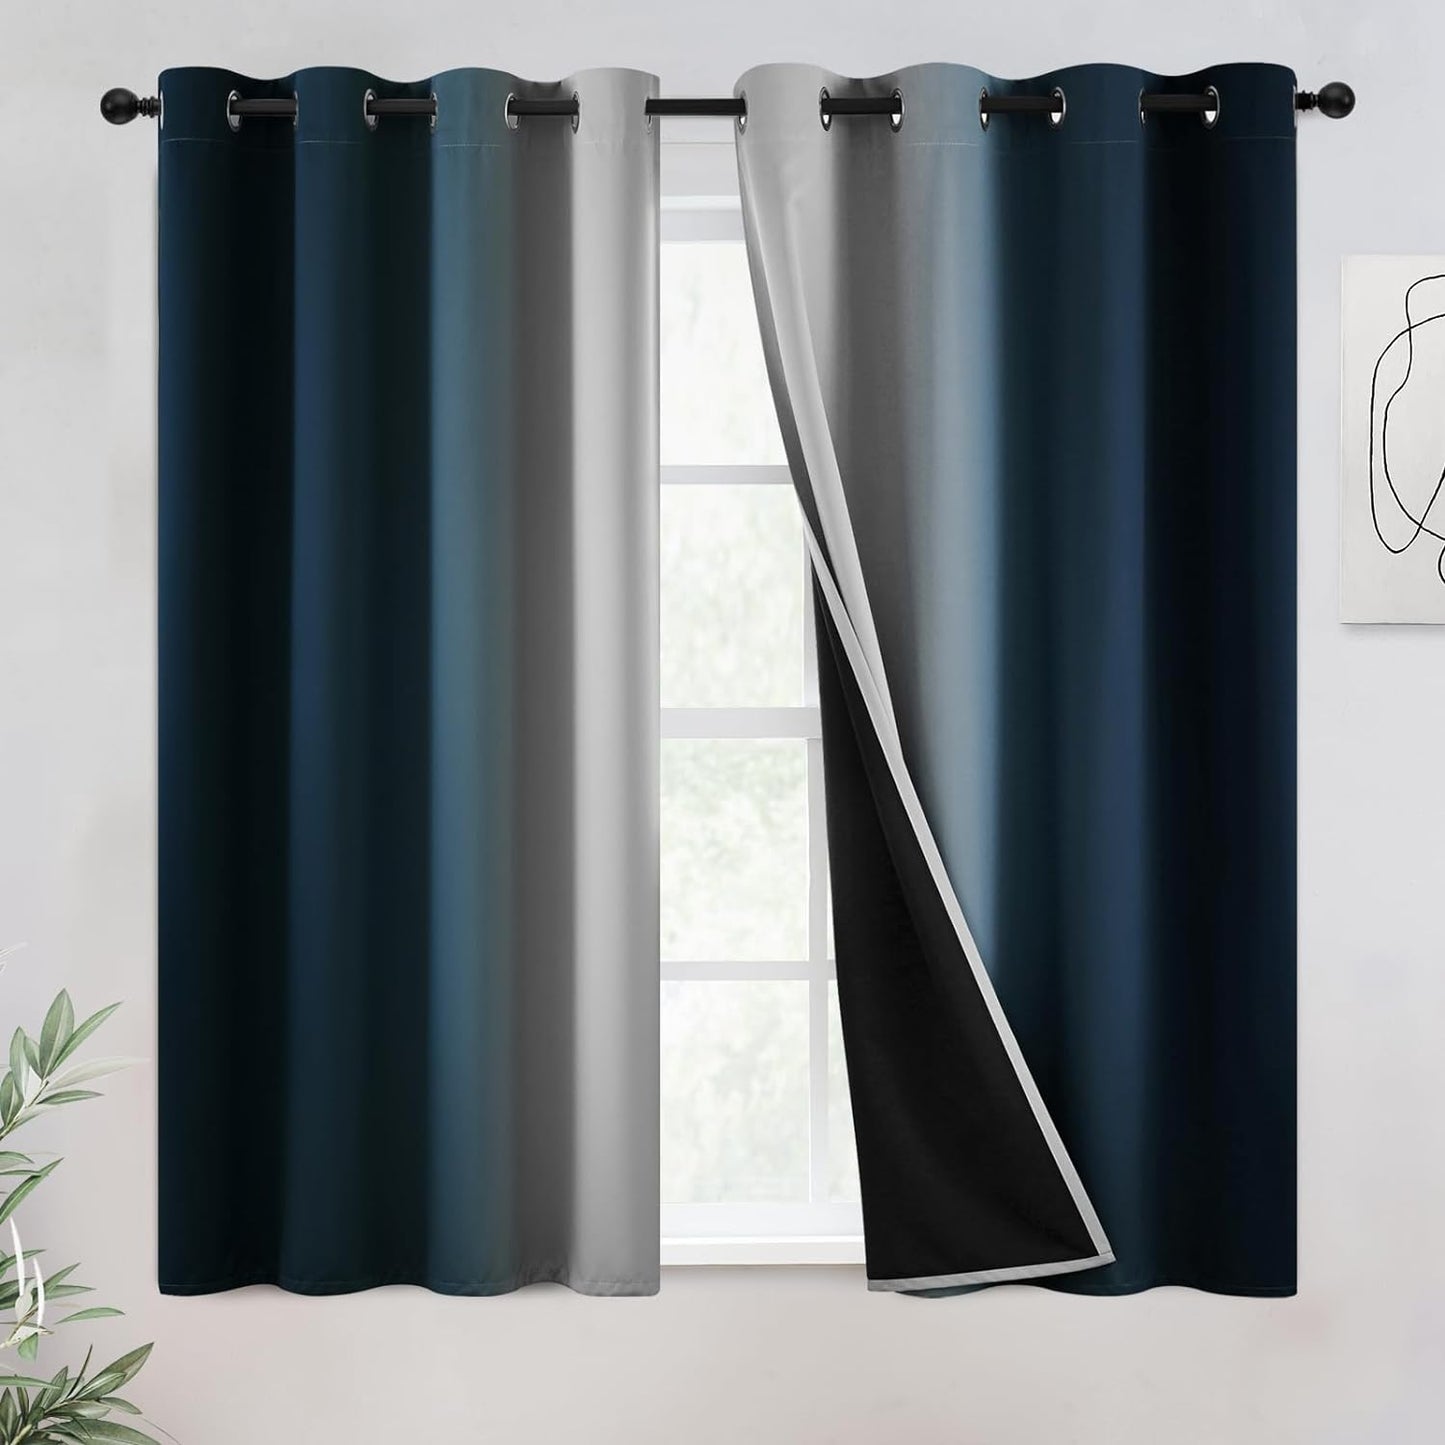 COSVIYA 100% Blackout Curtains & Drapes Ombre Purple Curtains 63 Inch Length 2 Panels,Full Room Darkening Grommet Gradient Insulated Thermal Window Curtains for Bedroom/Living Room,52X63 Inches  COSVIYA Blackout Navy To Grayish White 52W X 54L 